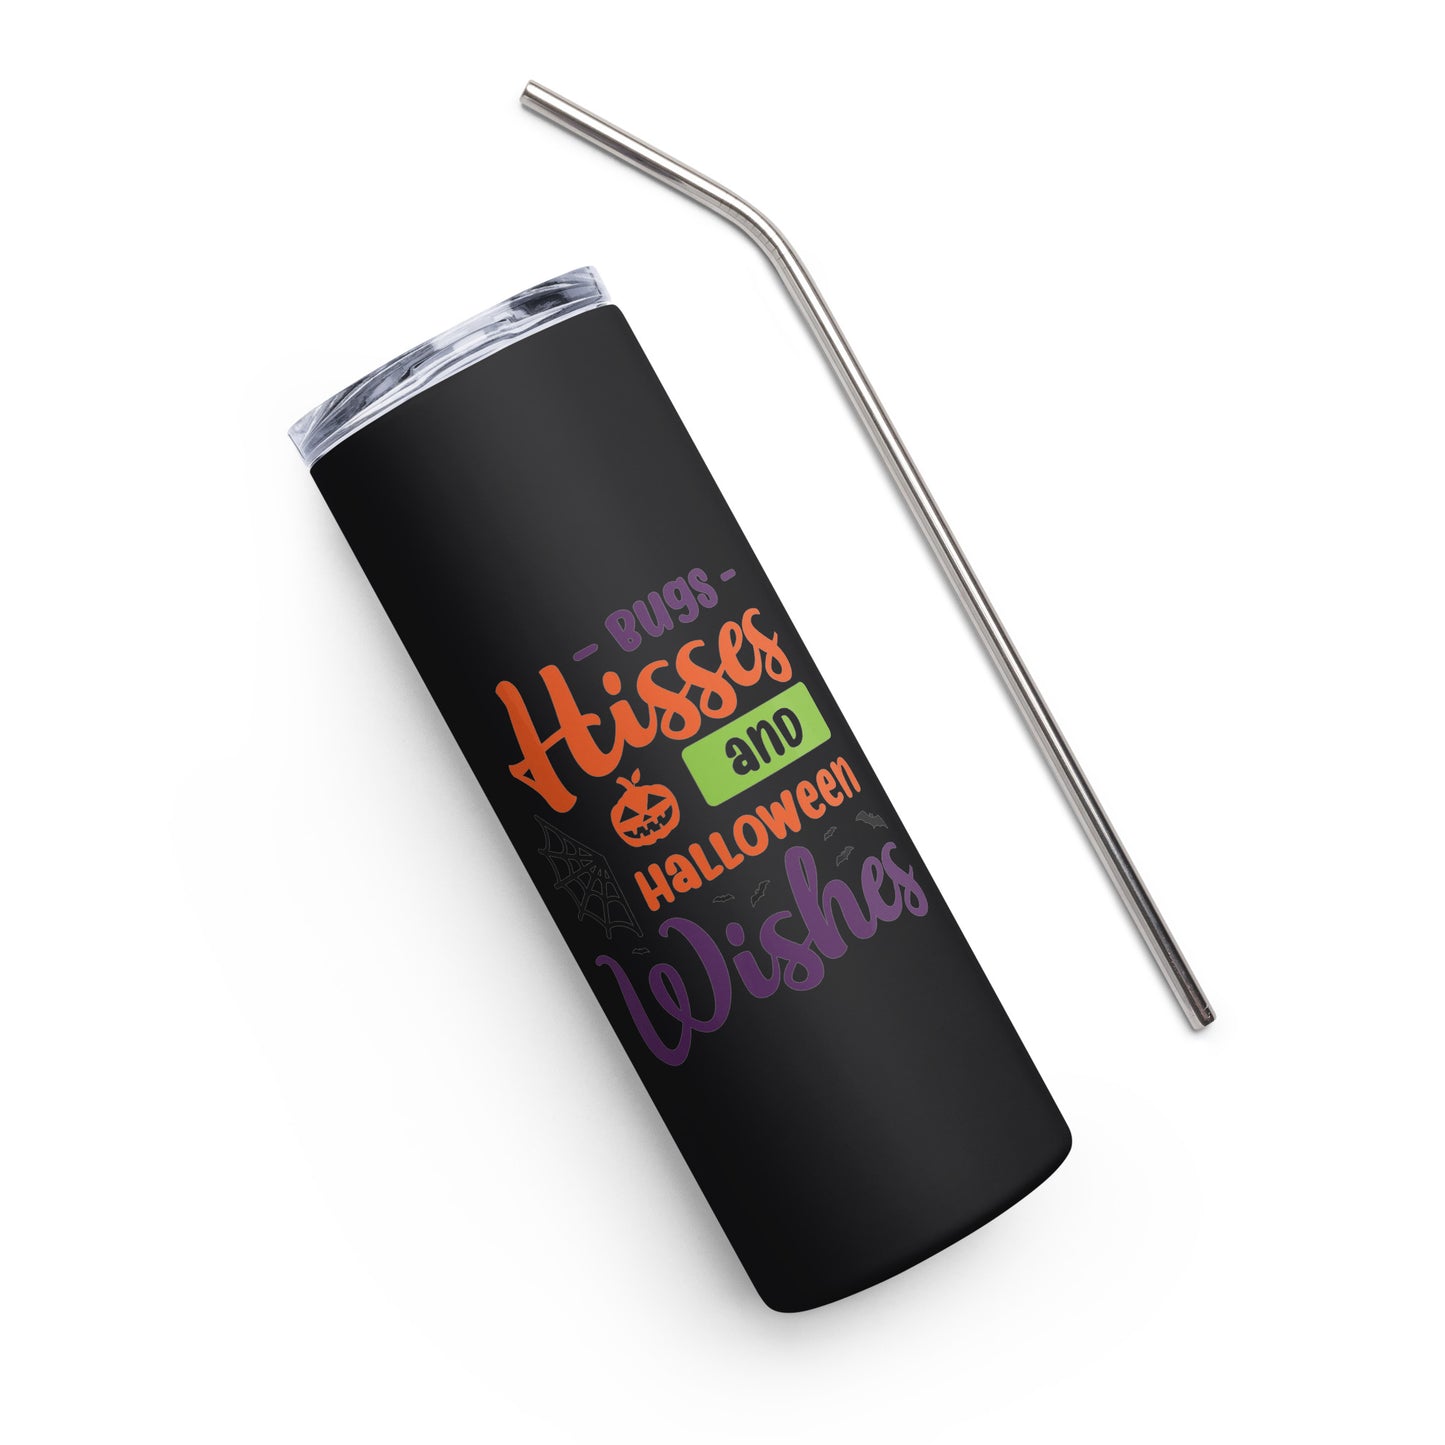 Bugs Hisses and Halloween Kisses Stainless steel tumbler